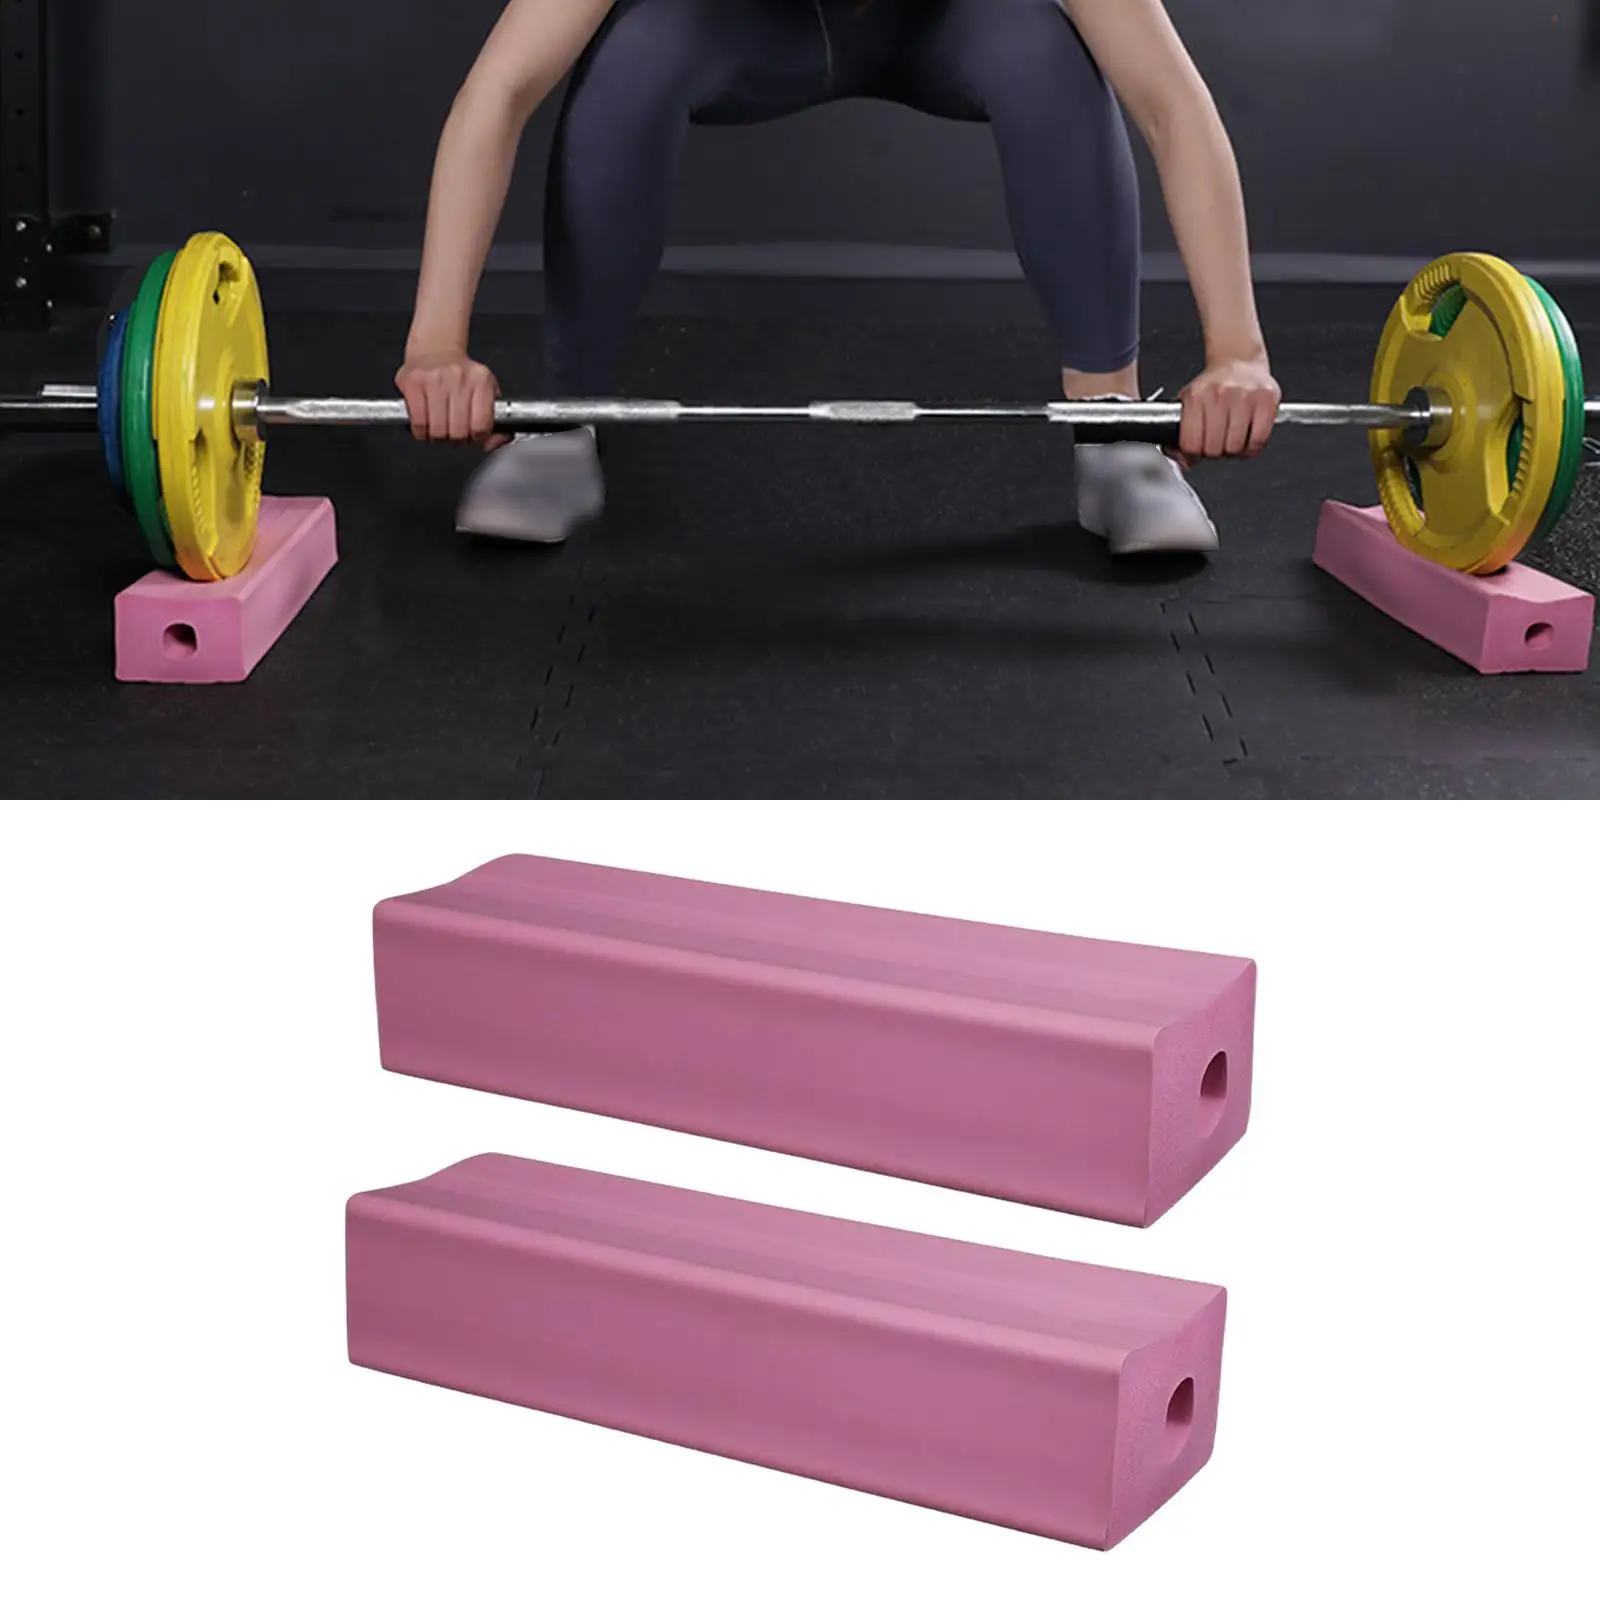 Fitness Barbell Pad Durable Good Elasticity Padded Cushion for Weightlifting Training Exercises Easier Barbell Placement Office